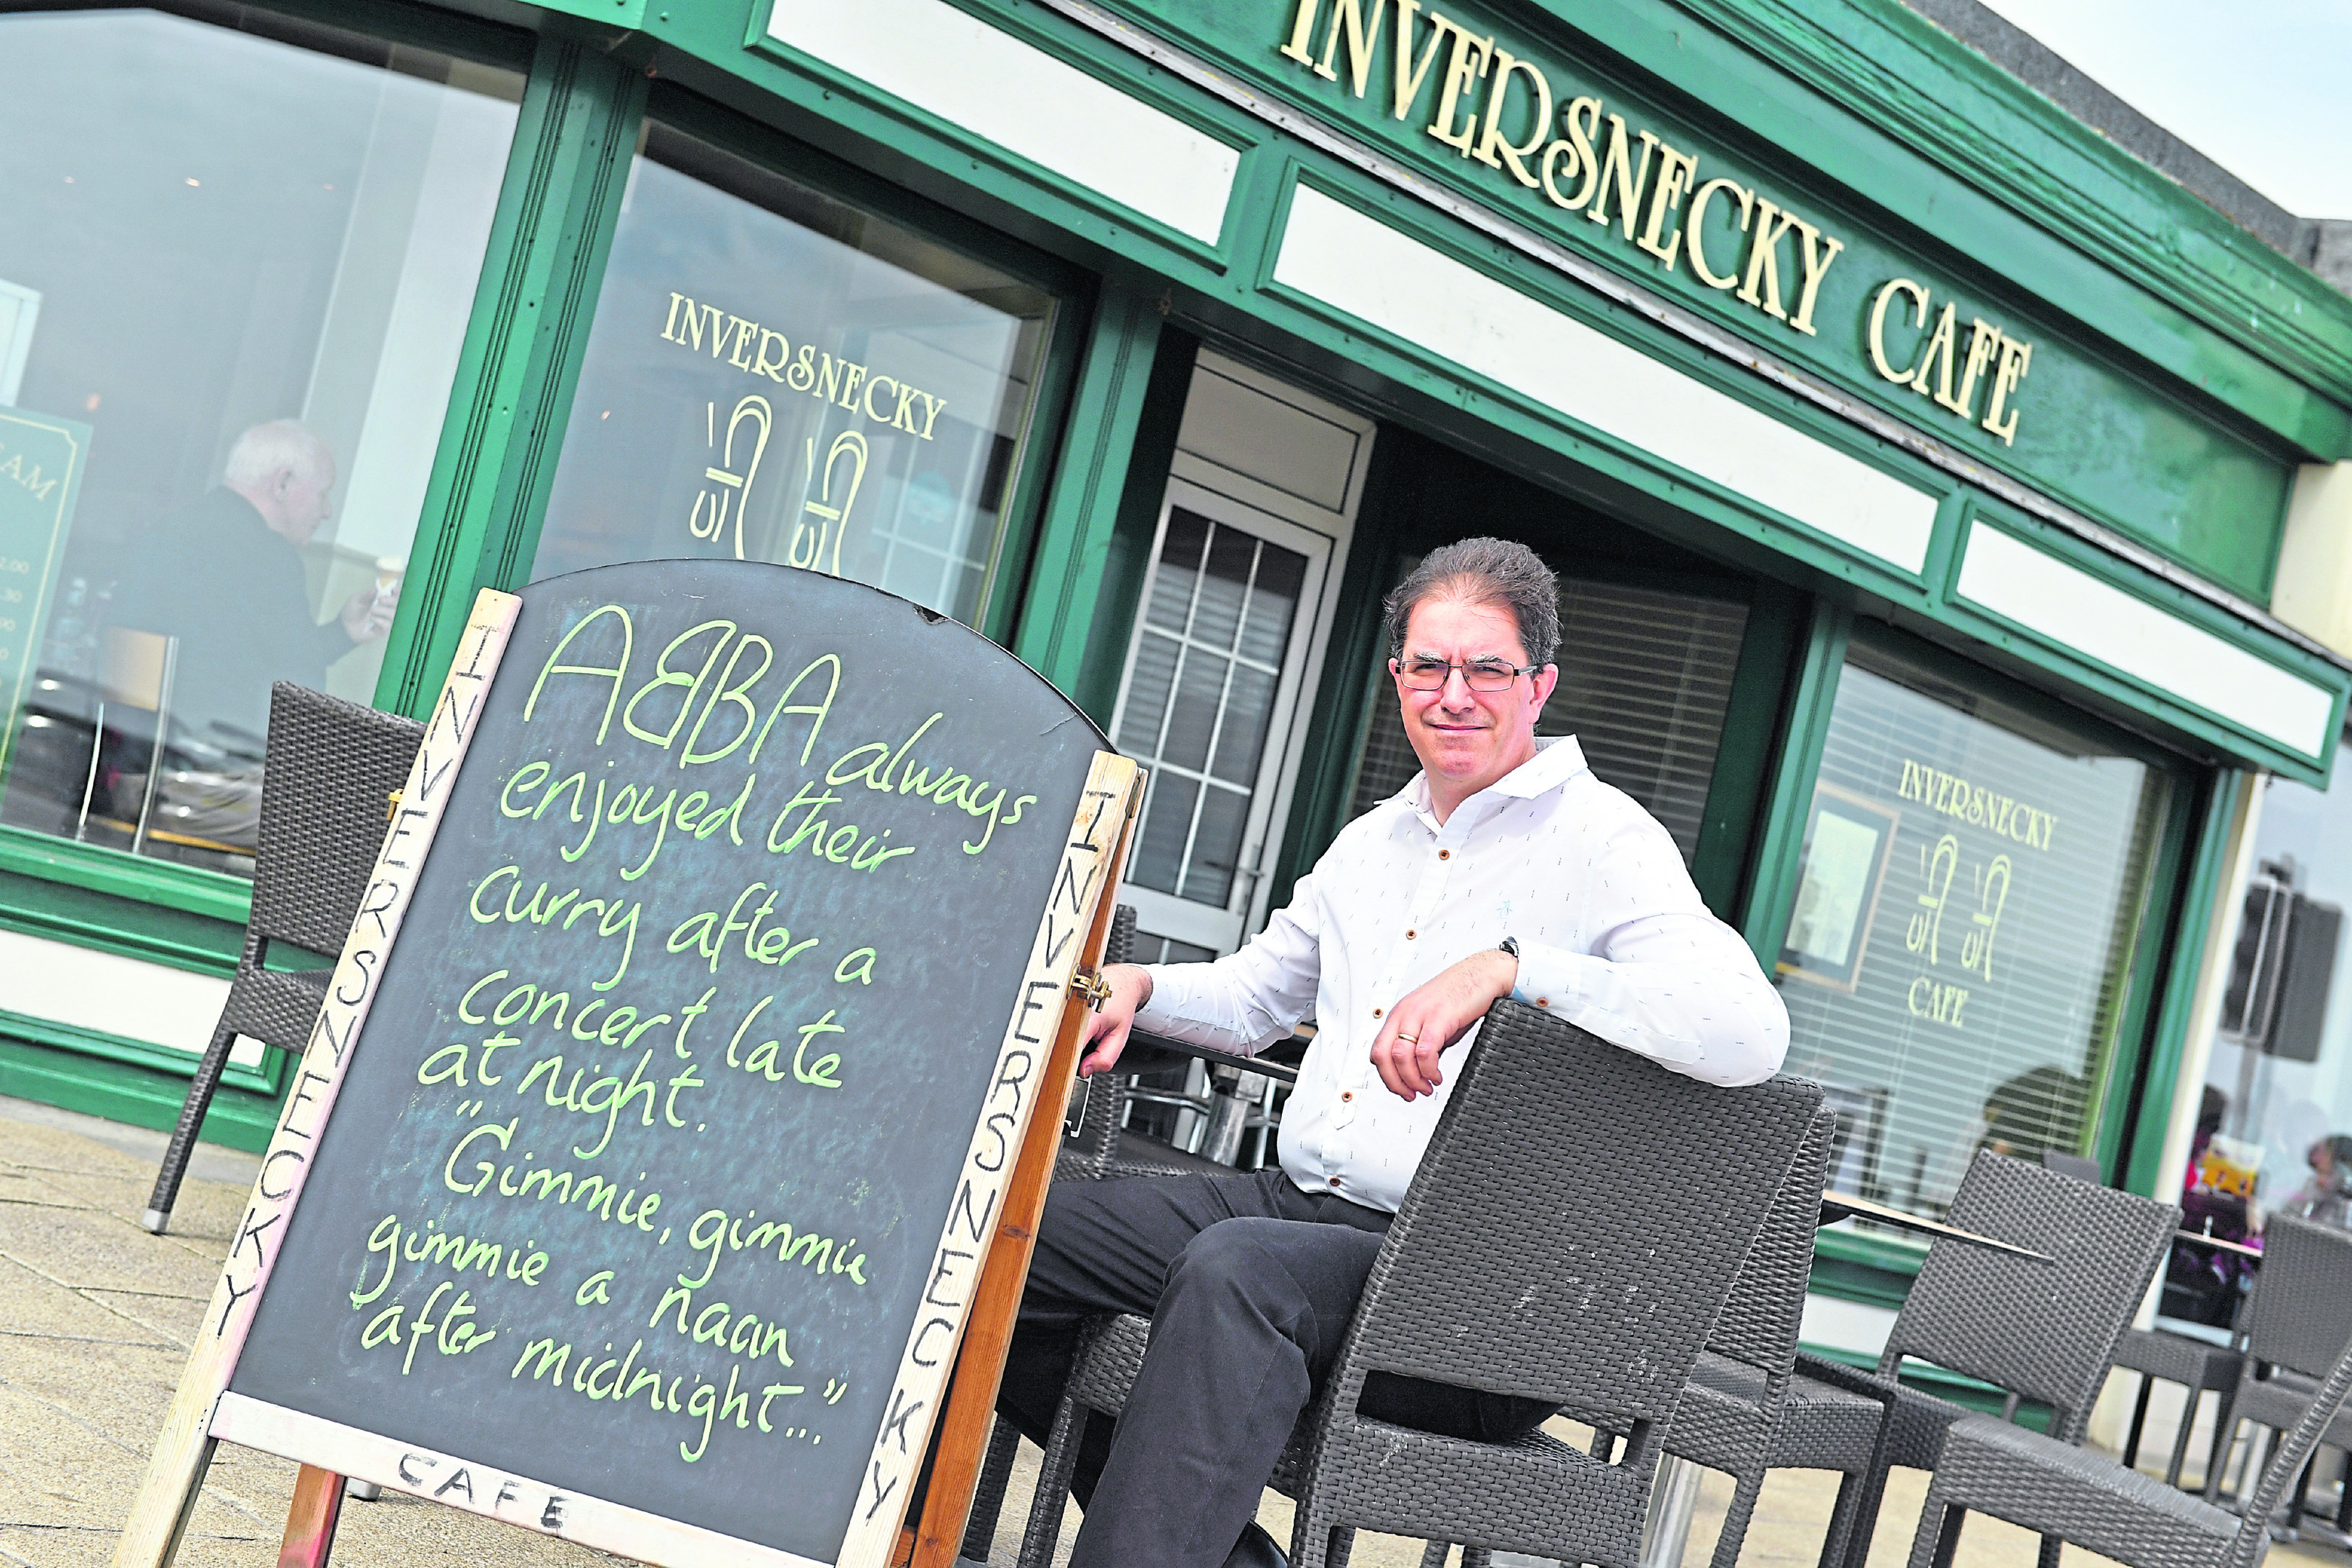 Martin Vicca outside the Inversnecky Cafe at Aberdeen Beach with some of the witty boards. Photograph by Kami Thomson